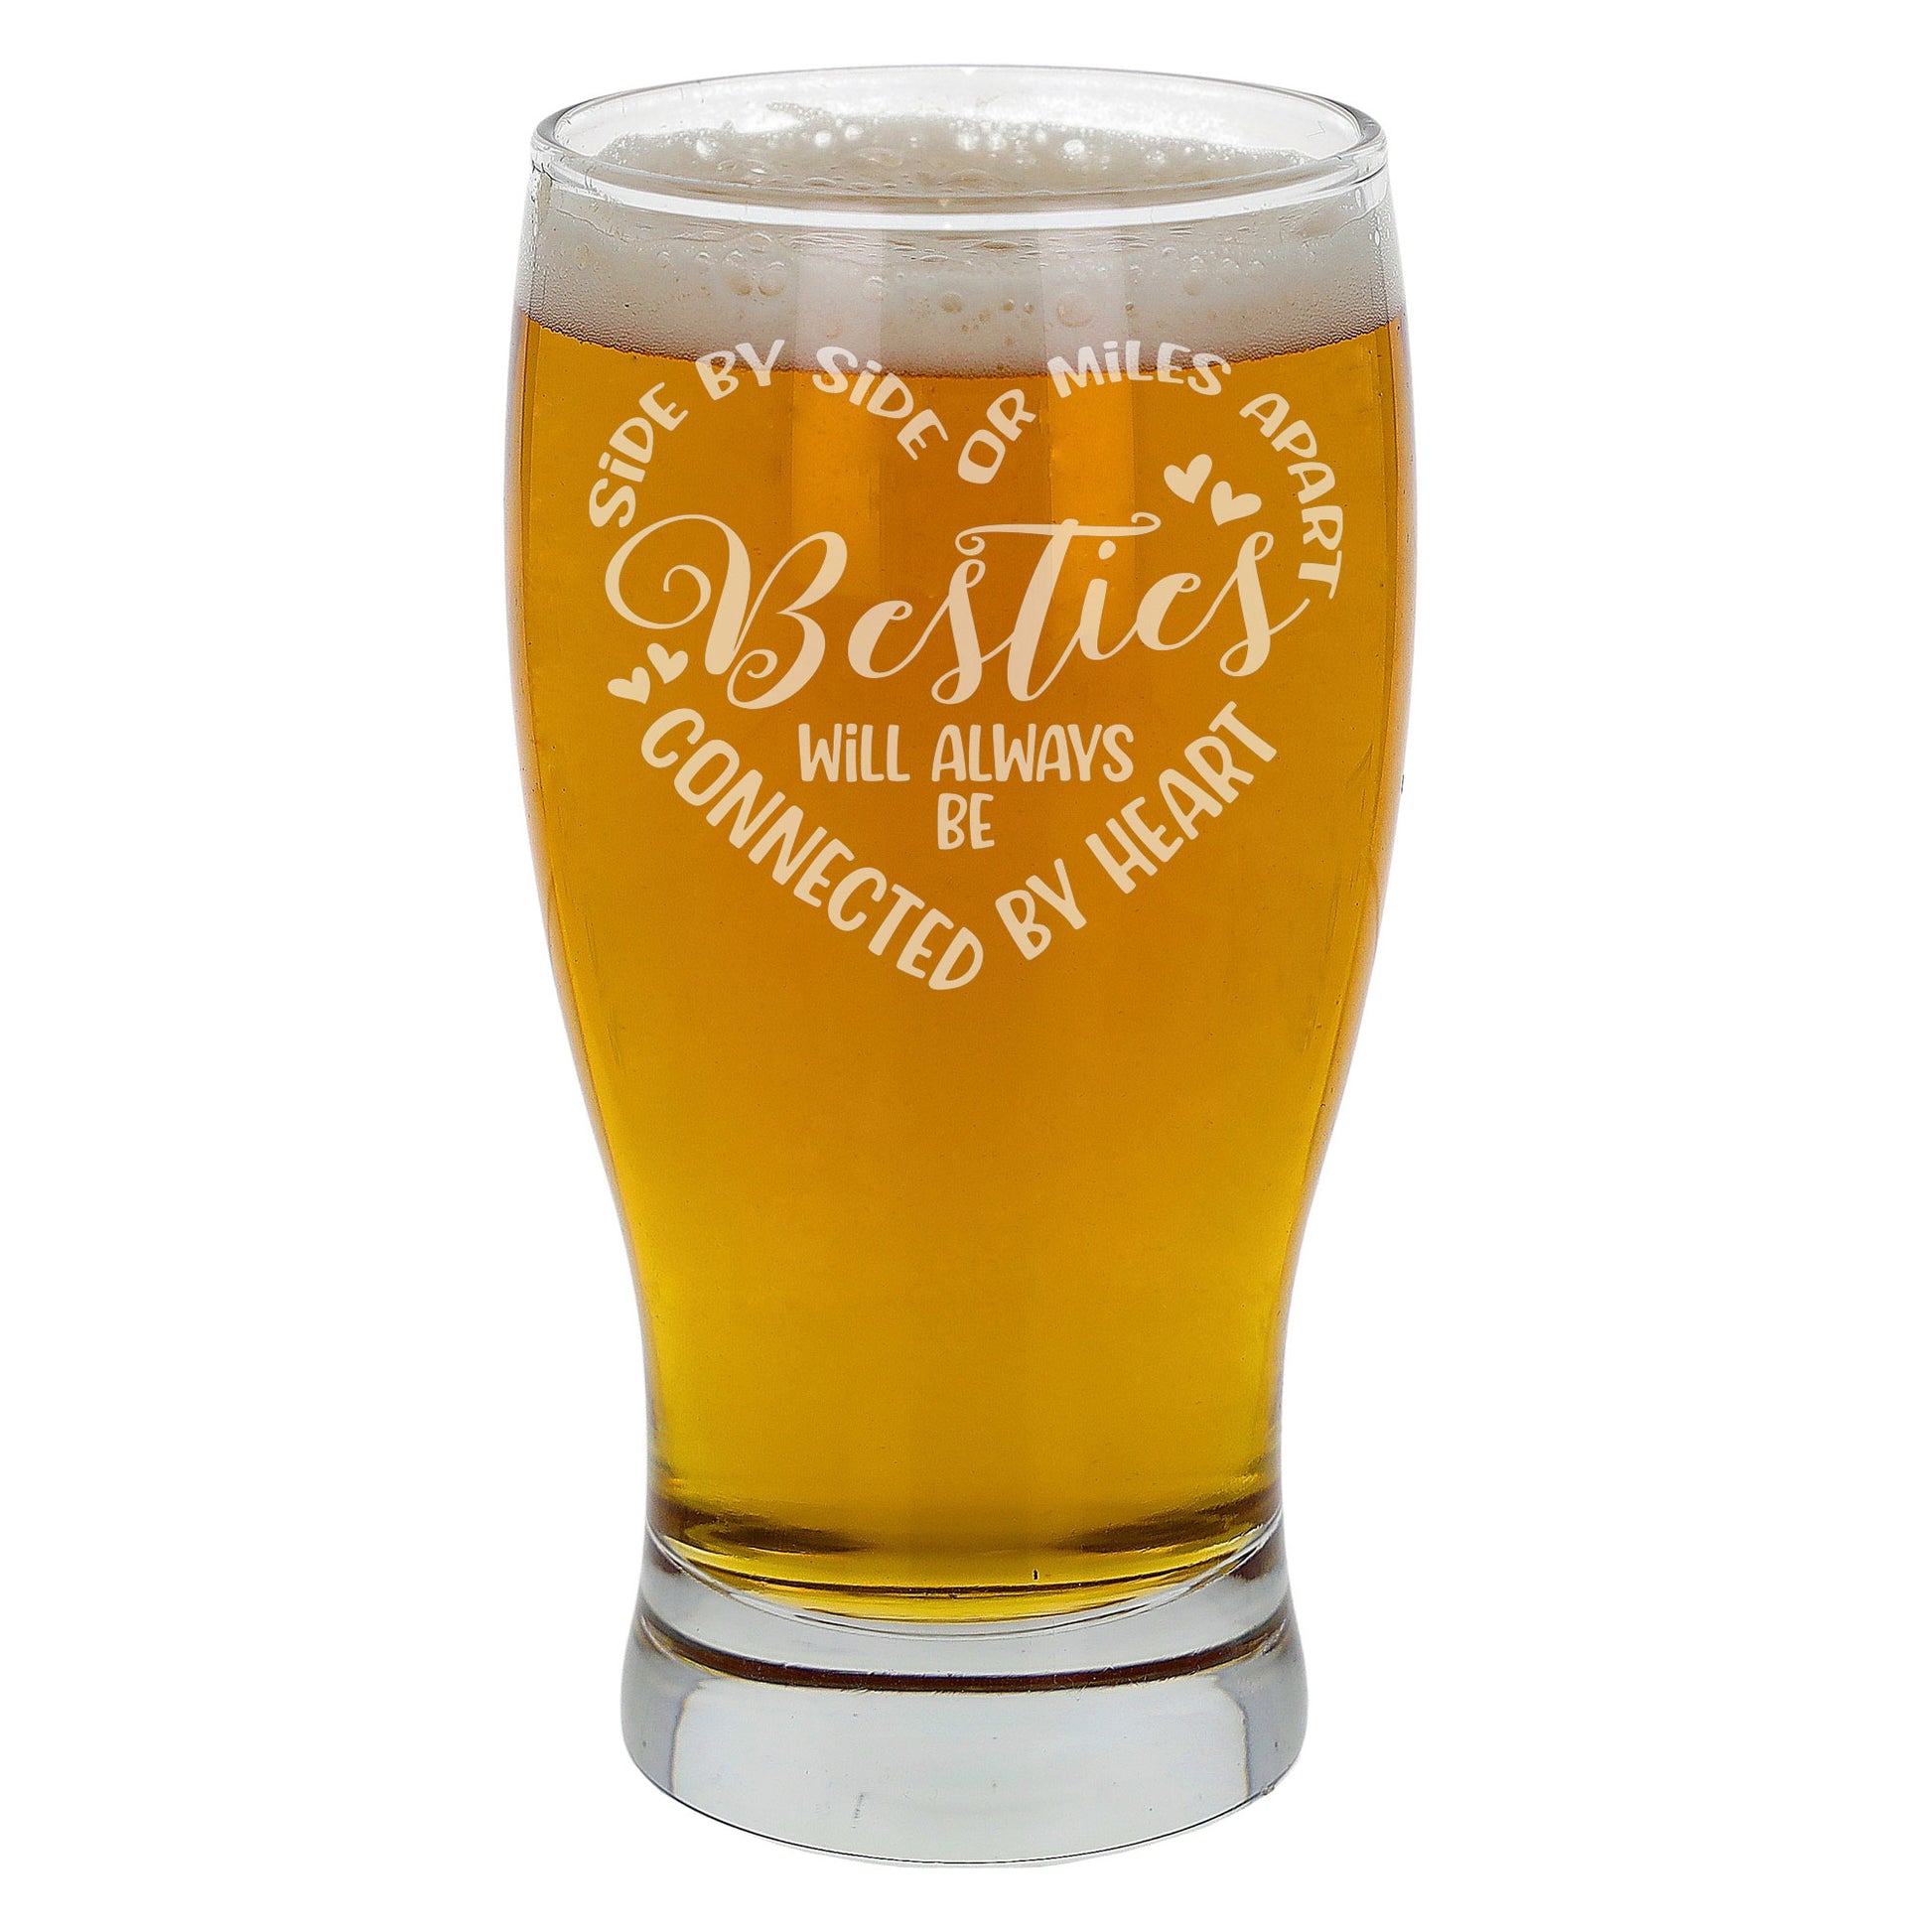 Besties Connected By Heart Engraved Beer Glass and/or Coaster Set  - Always Looking Good - Beer Glass Only  